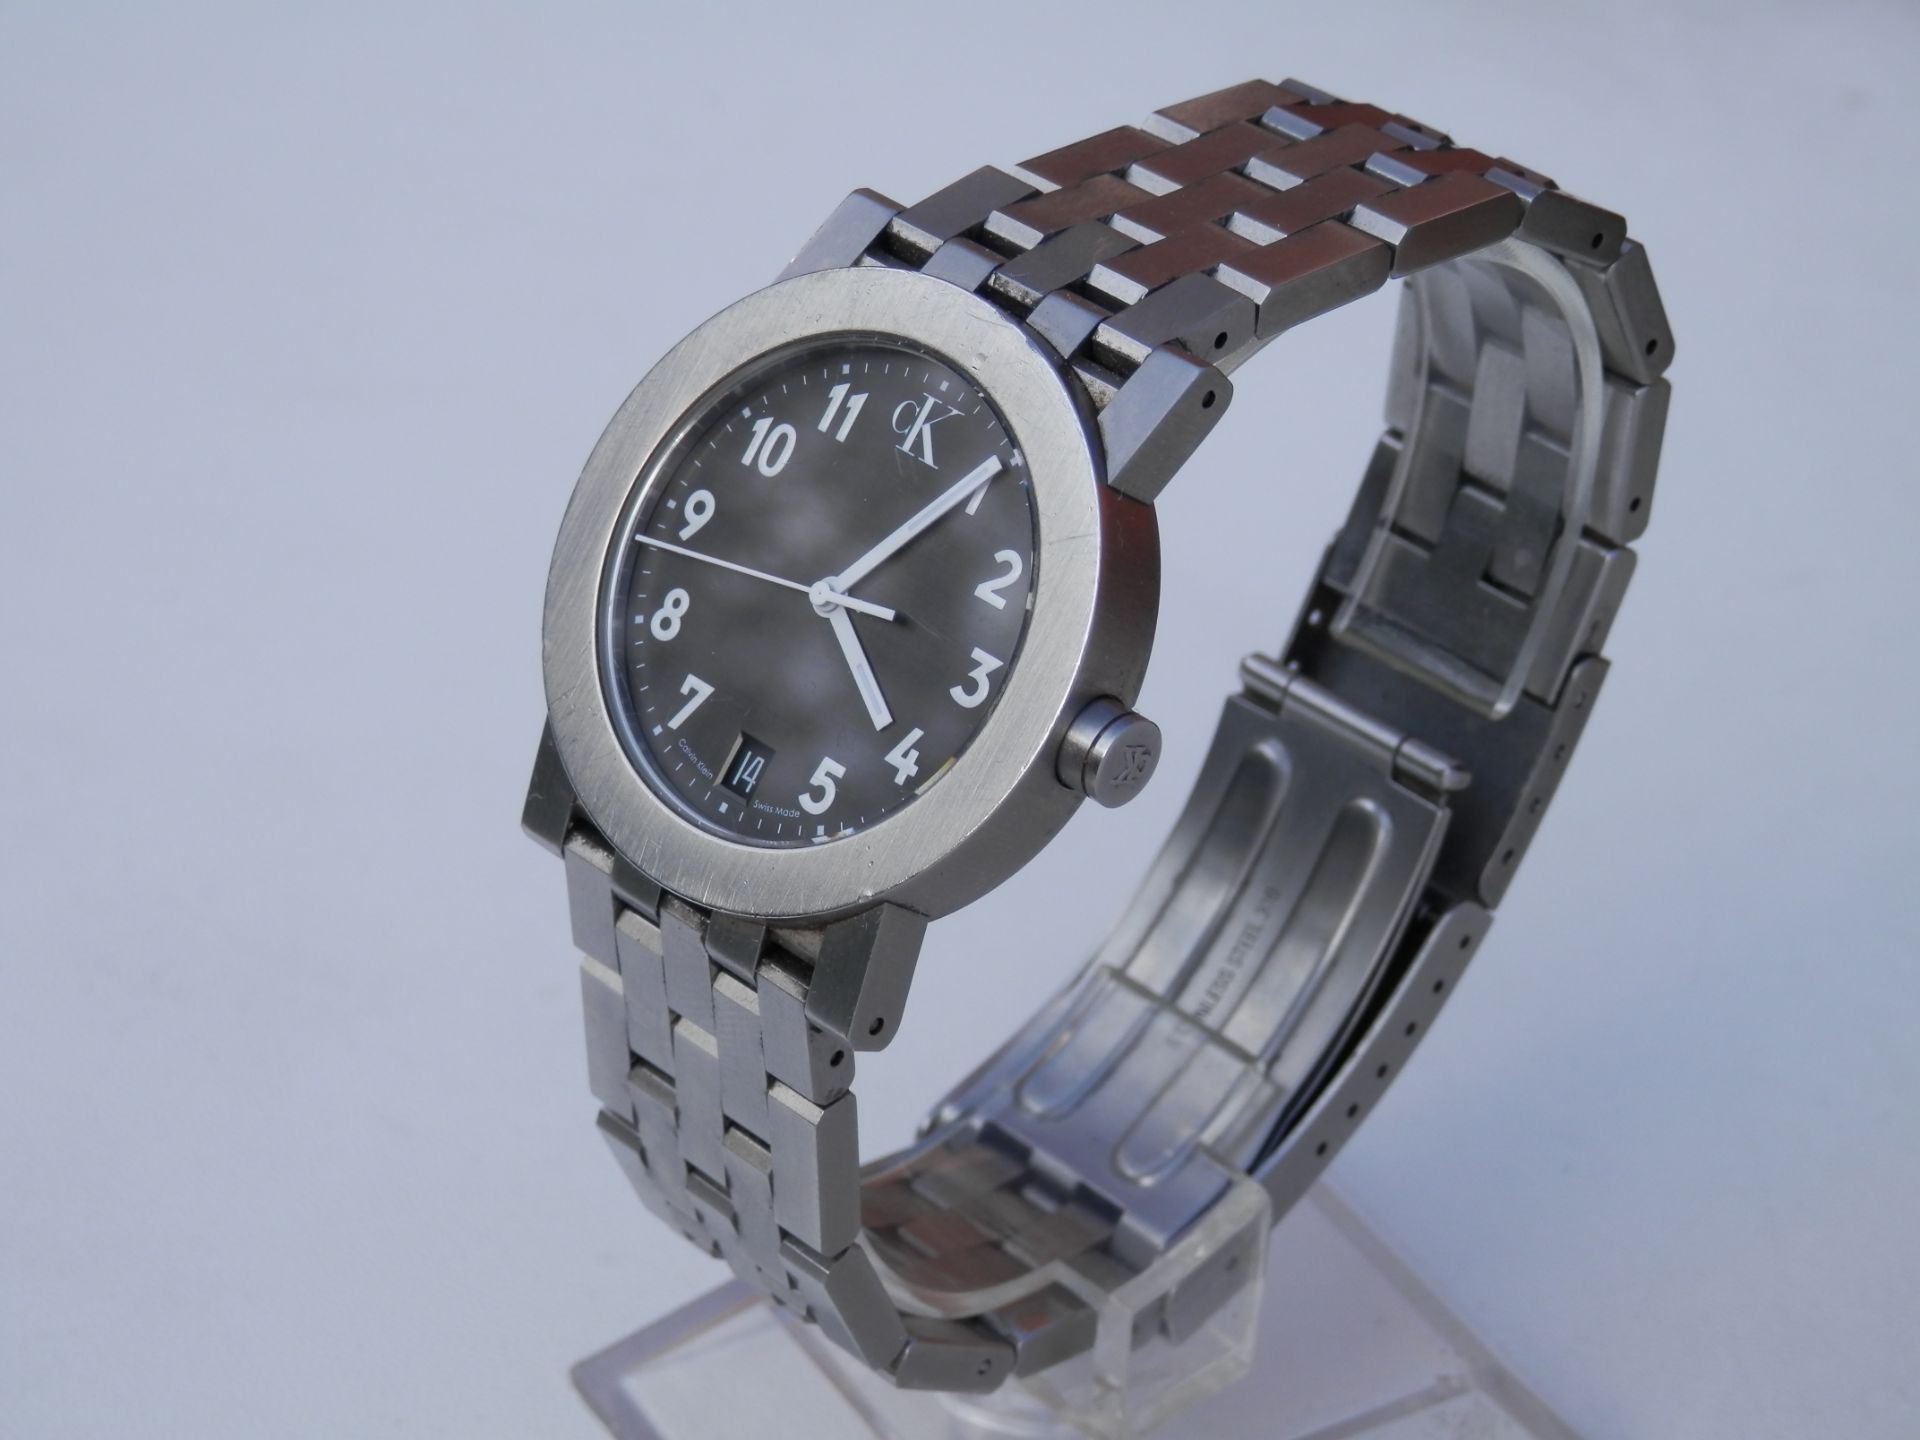 SUPERB SWISS GENTS 100% GENUINE CALVIN KLEIN K8111 FULL STAINLESS WATCH WITH MILITARY LOOK DIAL,